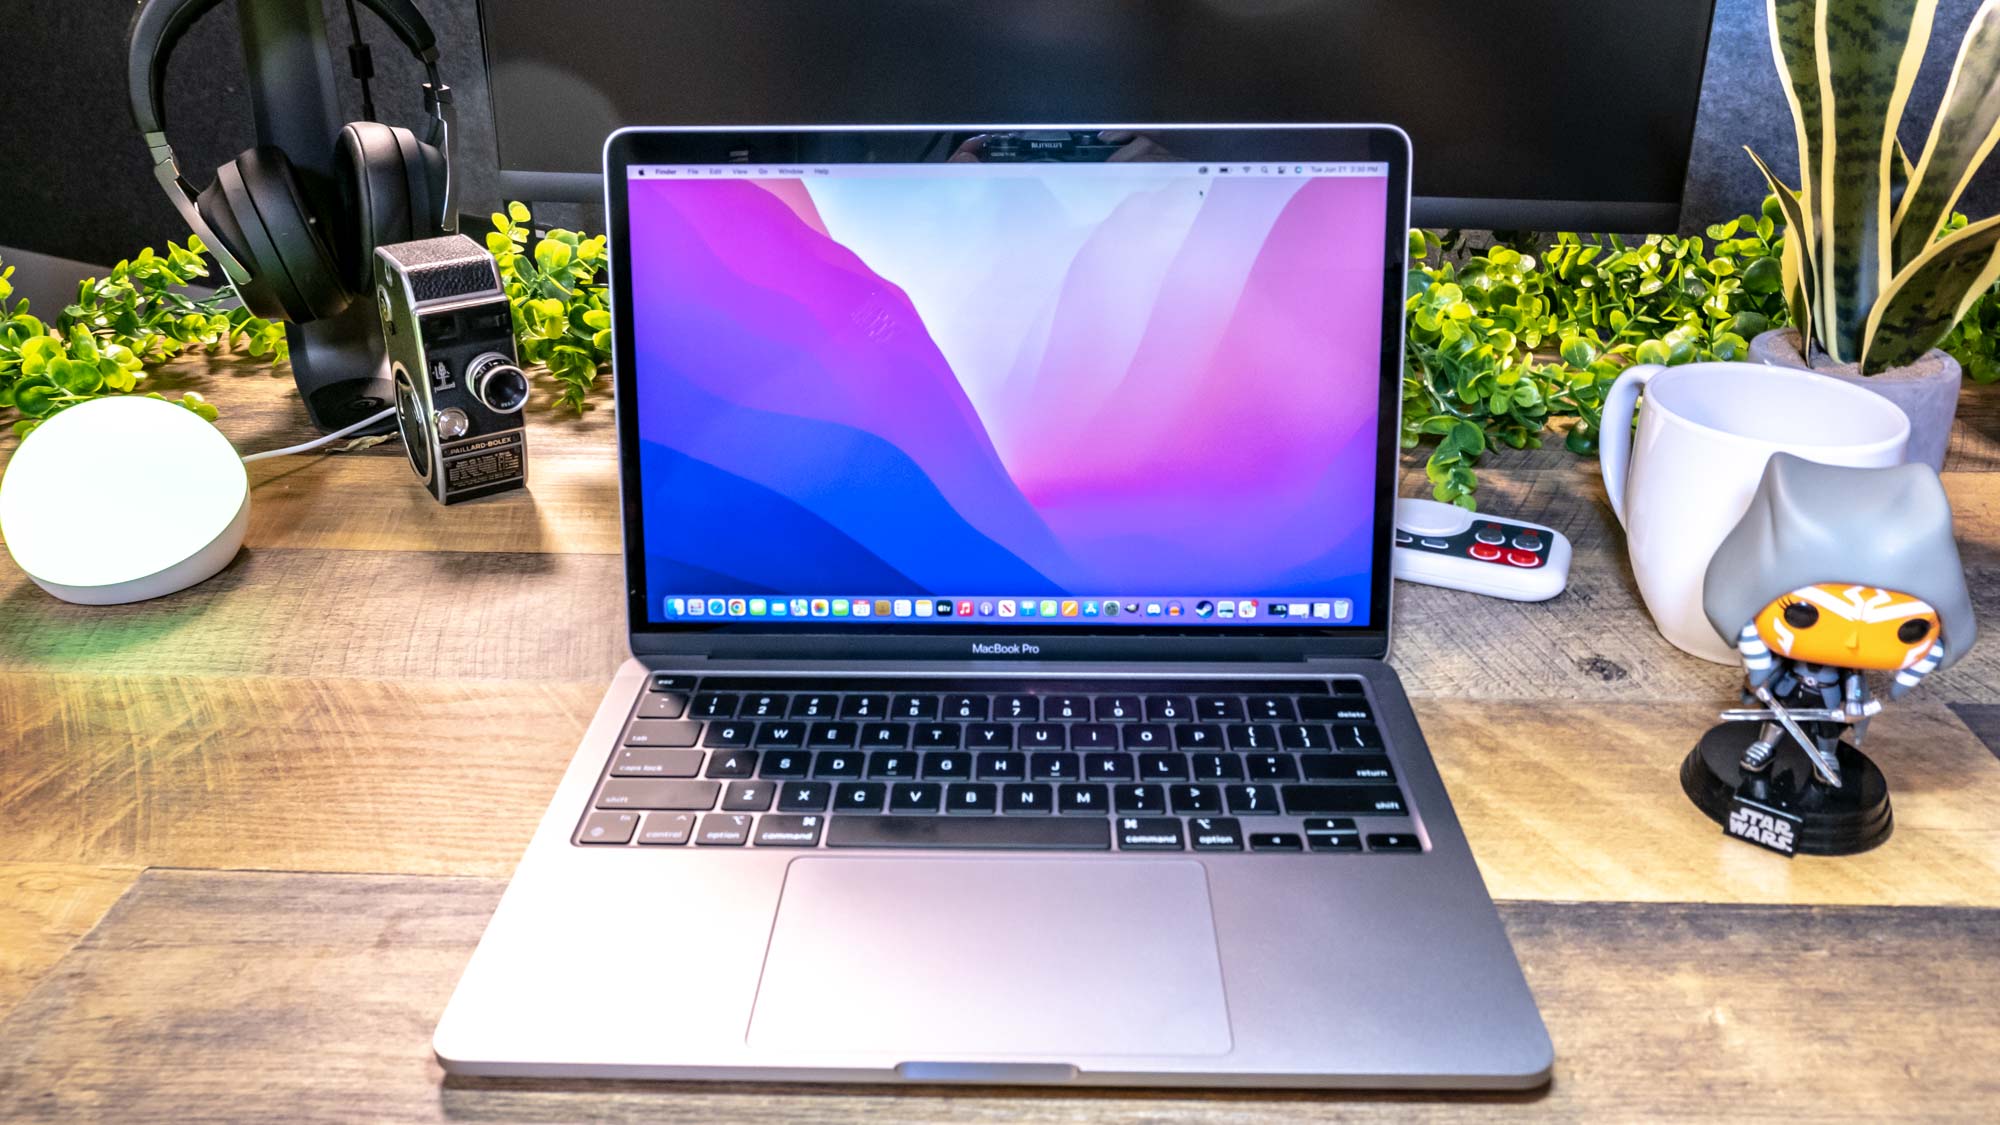 MacBook Pro 13-inch (M2, 2022) sitting on a desk —MacBook Pro 13-inch (M2, 2022) review